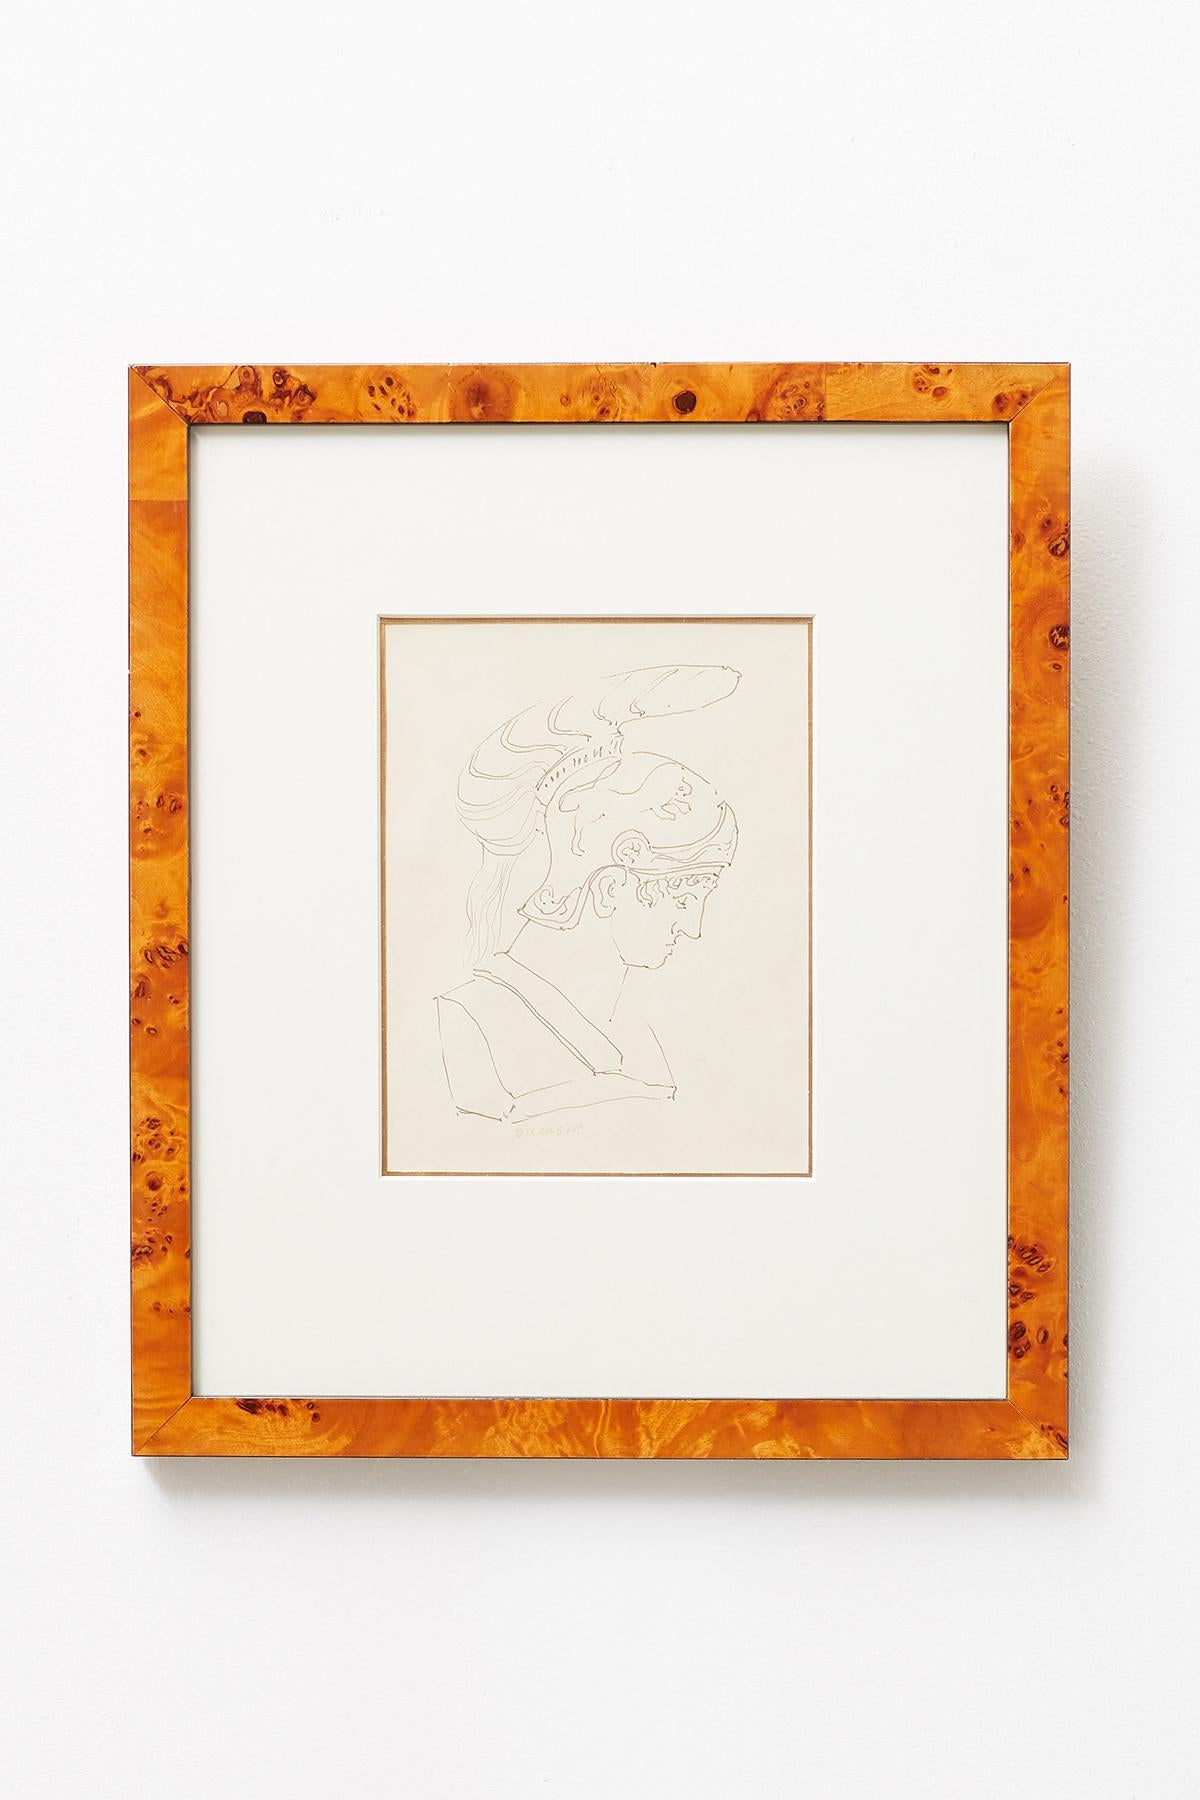 Exquisite pair of Greco-Roman pen and ink drawings by San Francisco artist Ralph DuCasse (1916-2003 American). Both signed on bottom, one of a warrior, and the other of the colosseum in Rome titled Colossed. Each framed in a burl veneered frame